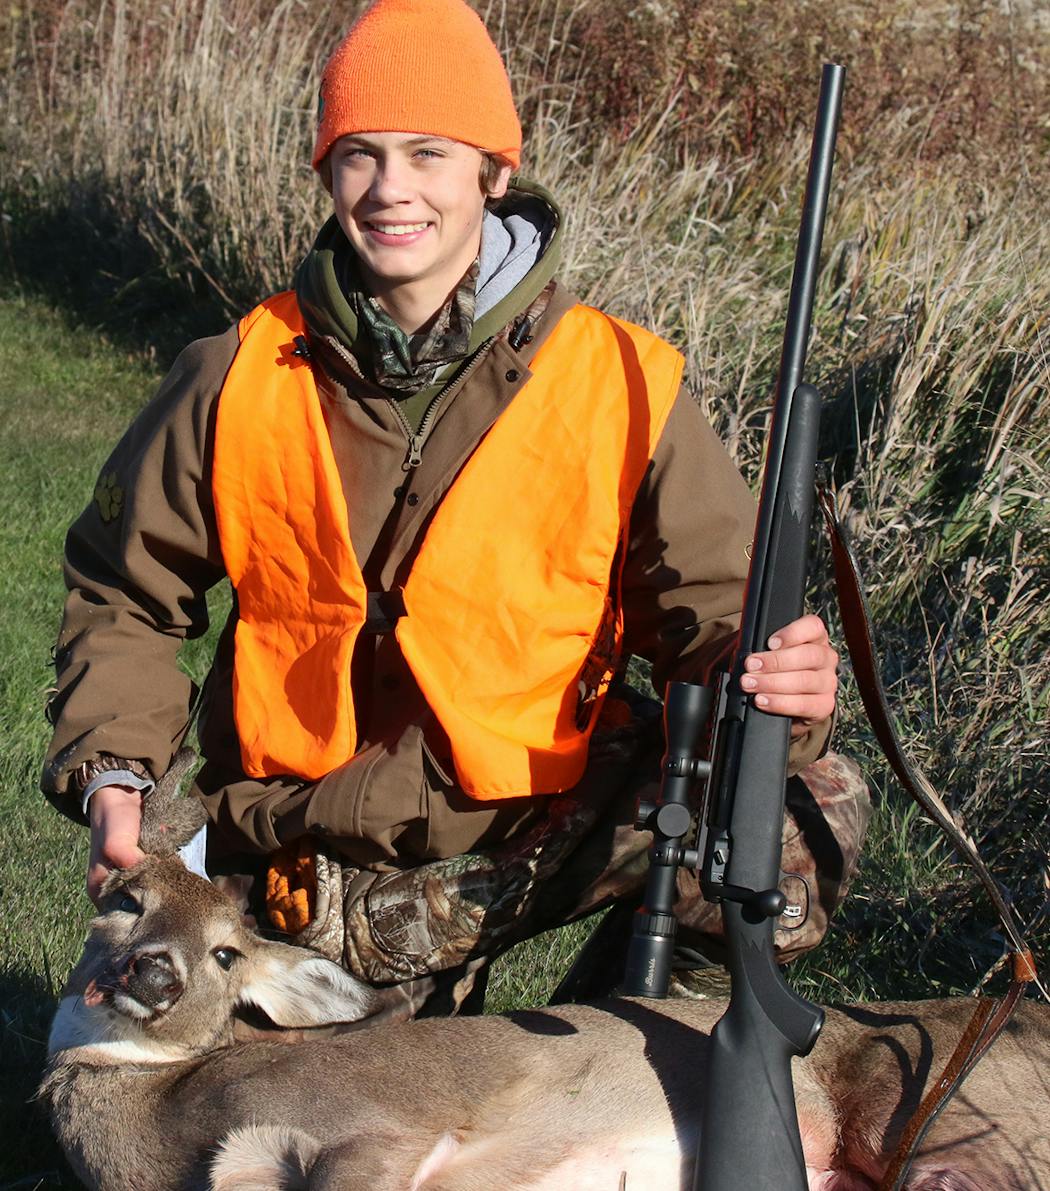 Isaac Joesting, 14, of Wyoming, Minn., with a doe he shot on opening morning during the youth hunt at Afton State Park in Hastings. He used copper ammunition in his bolt-action gun, harvesting the deer with one shot.